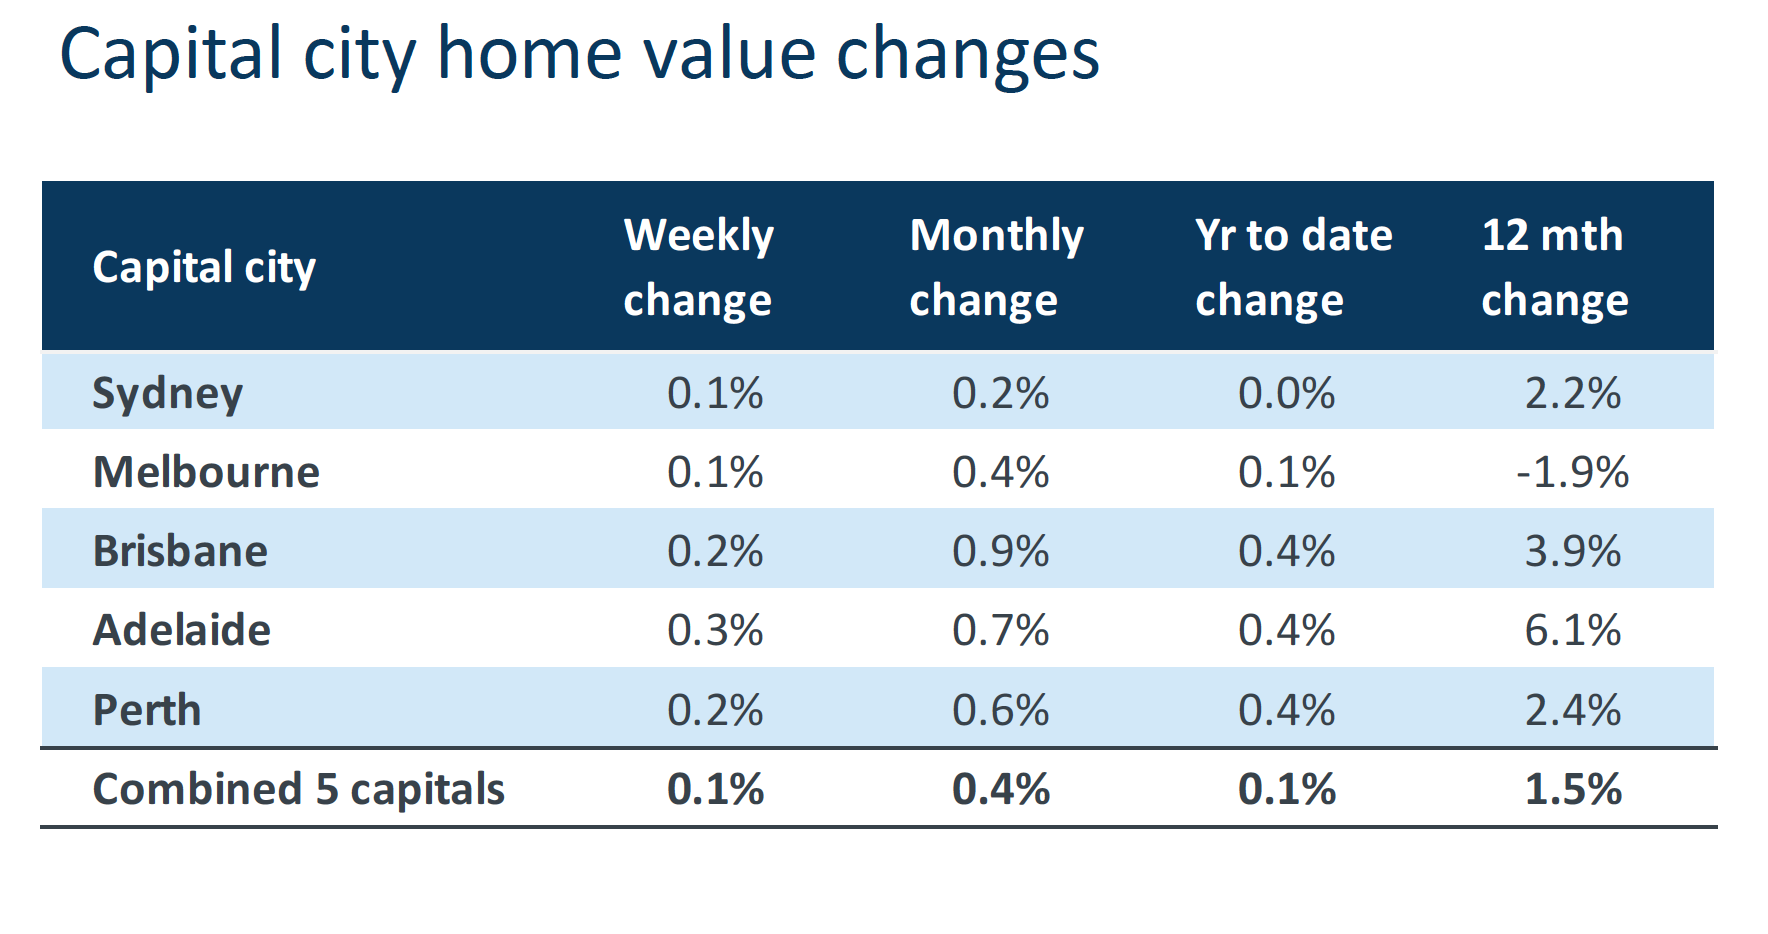 Capital city home value changes